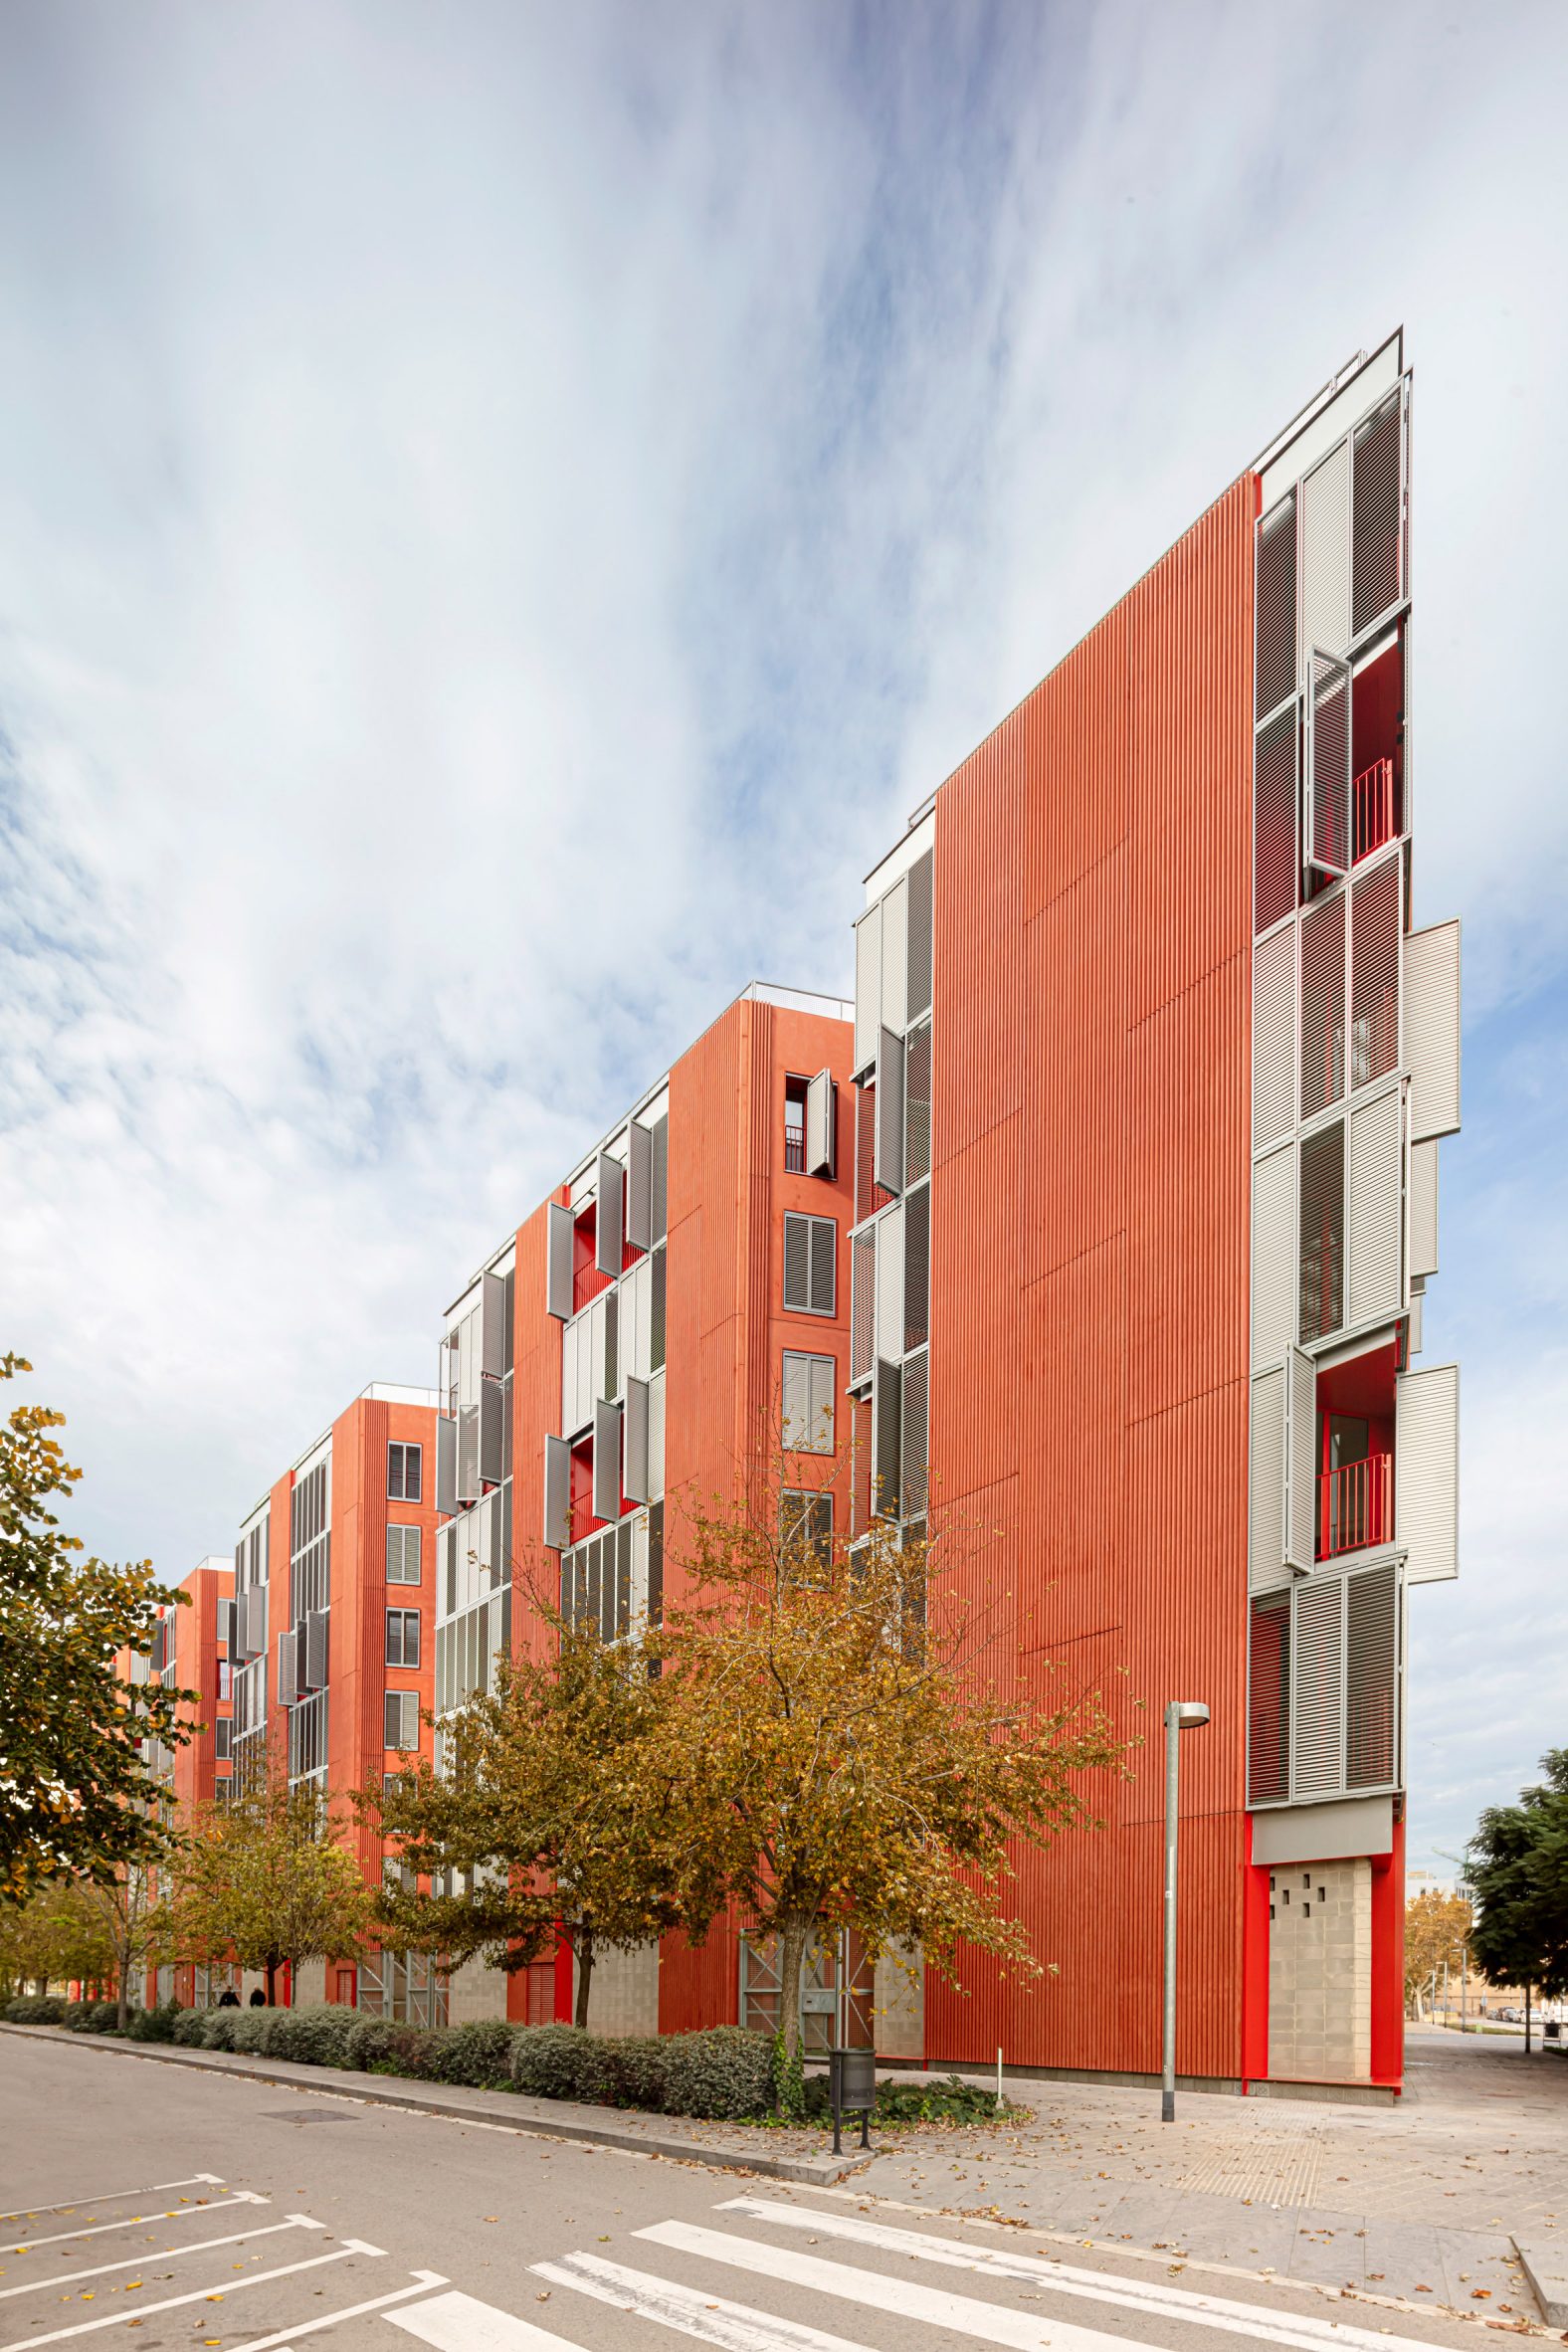 Facade of triangular social housing block by MIAS and Coll-Leclerc Architects